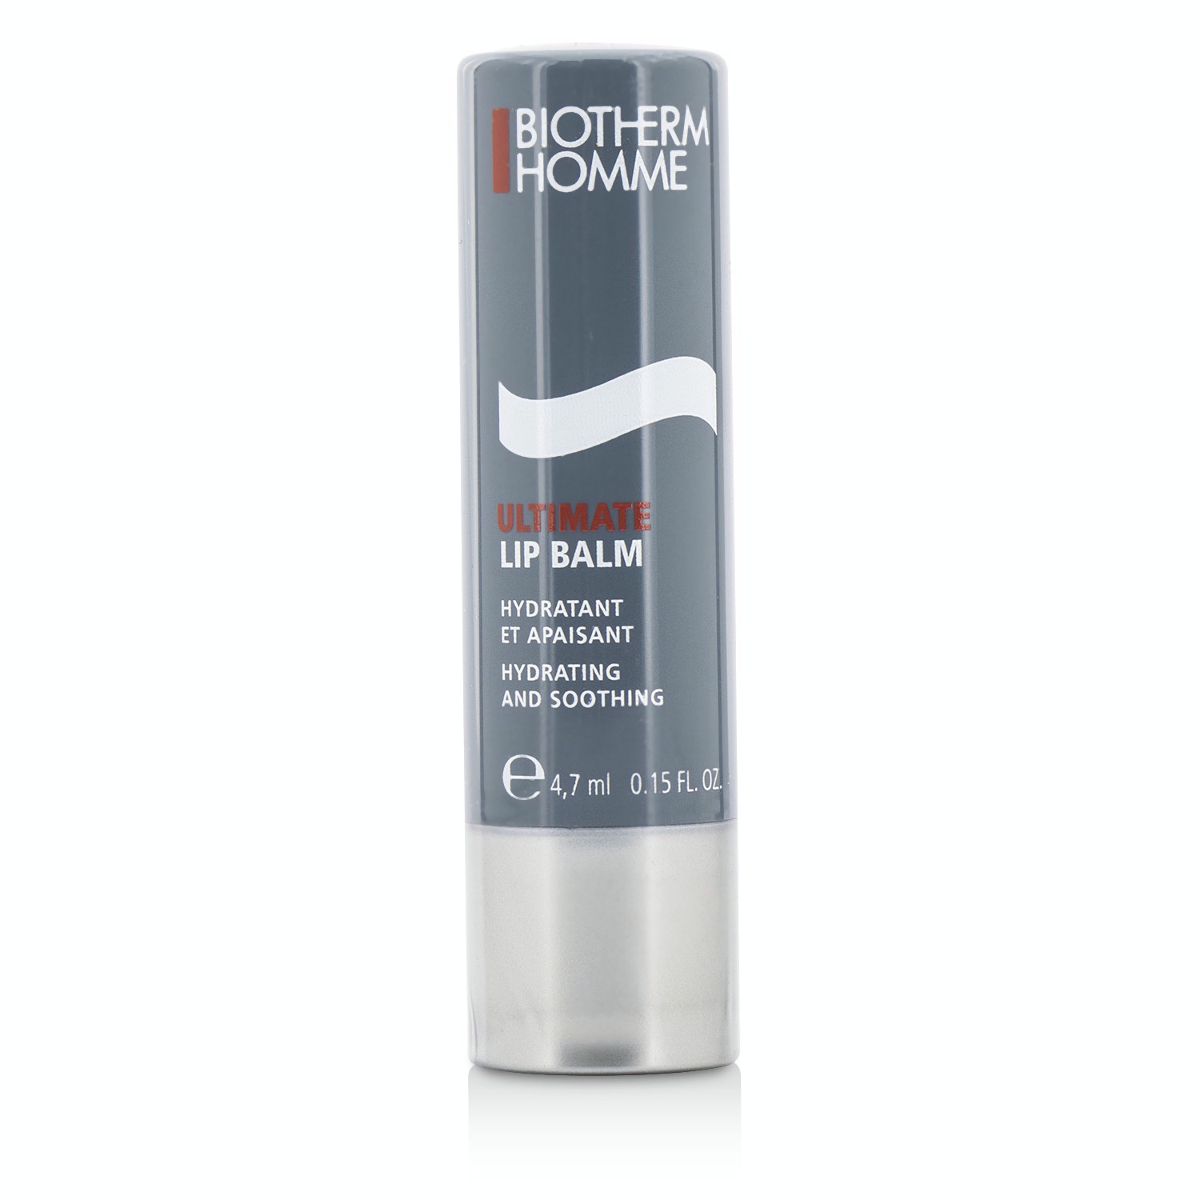 Homme Ultimate Lip Balm Biotherm Image